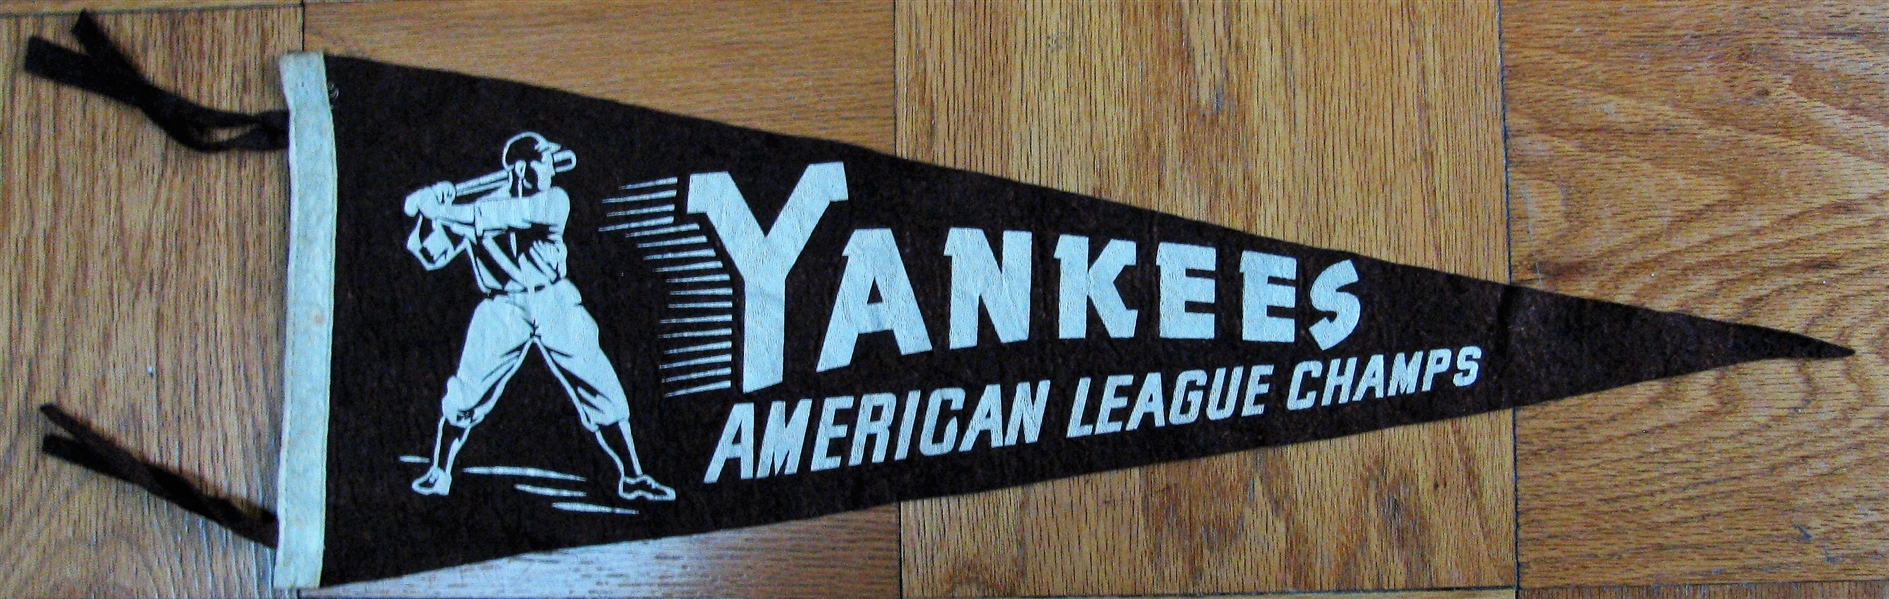 40's NEW YORK YANKEES AMERICAN LEAGUE CHAMPIONS 3/4 SIZE PENNANT